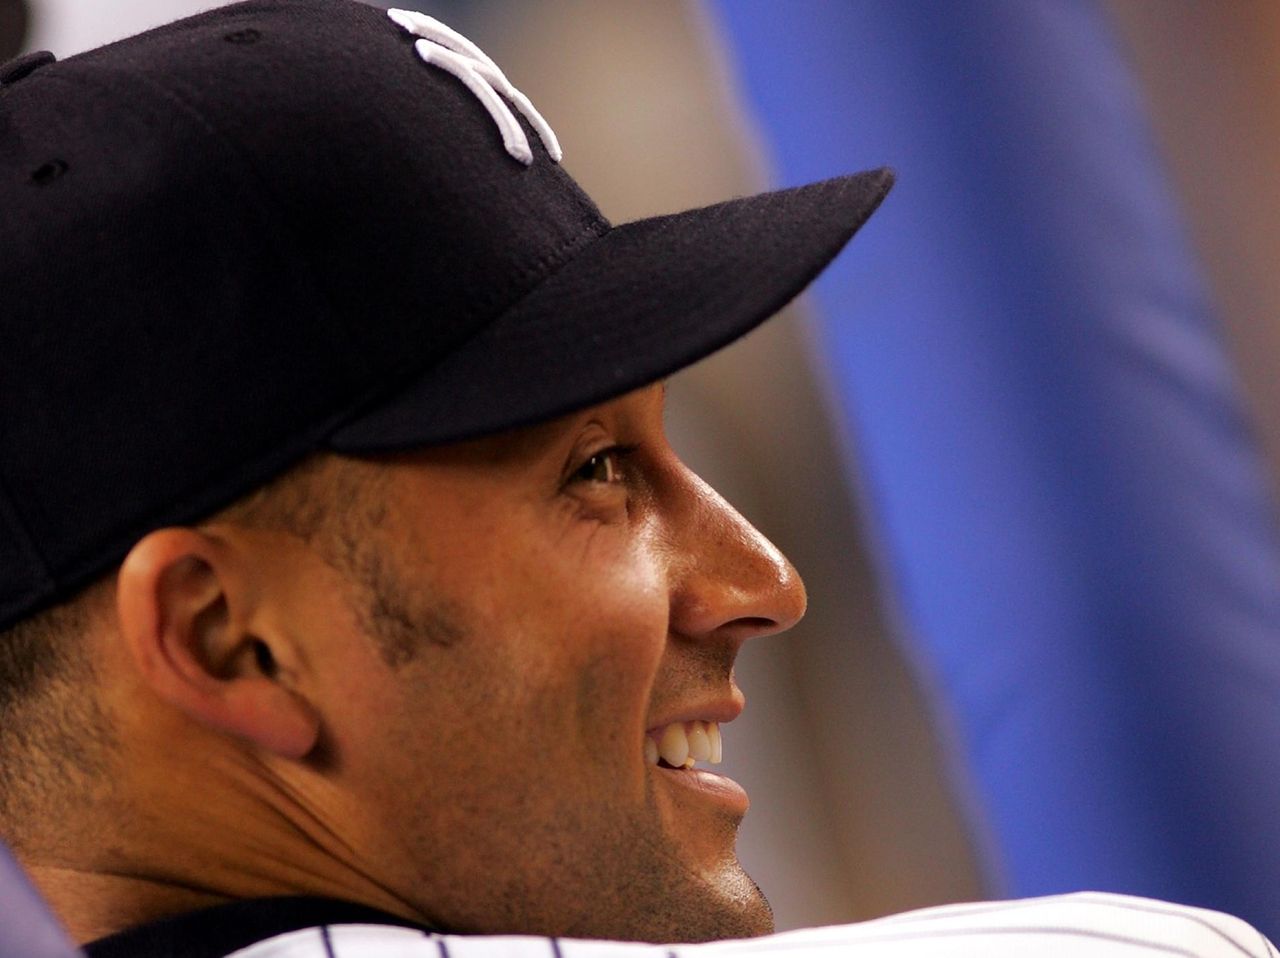 Why Manny Ramirez says Derek Jeter would have been 'just a